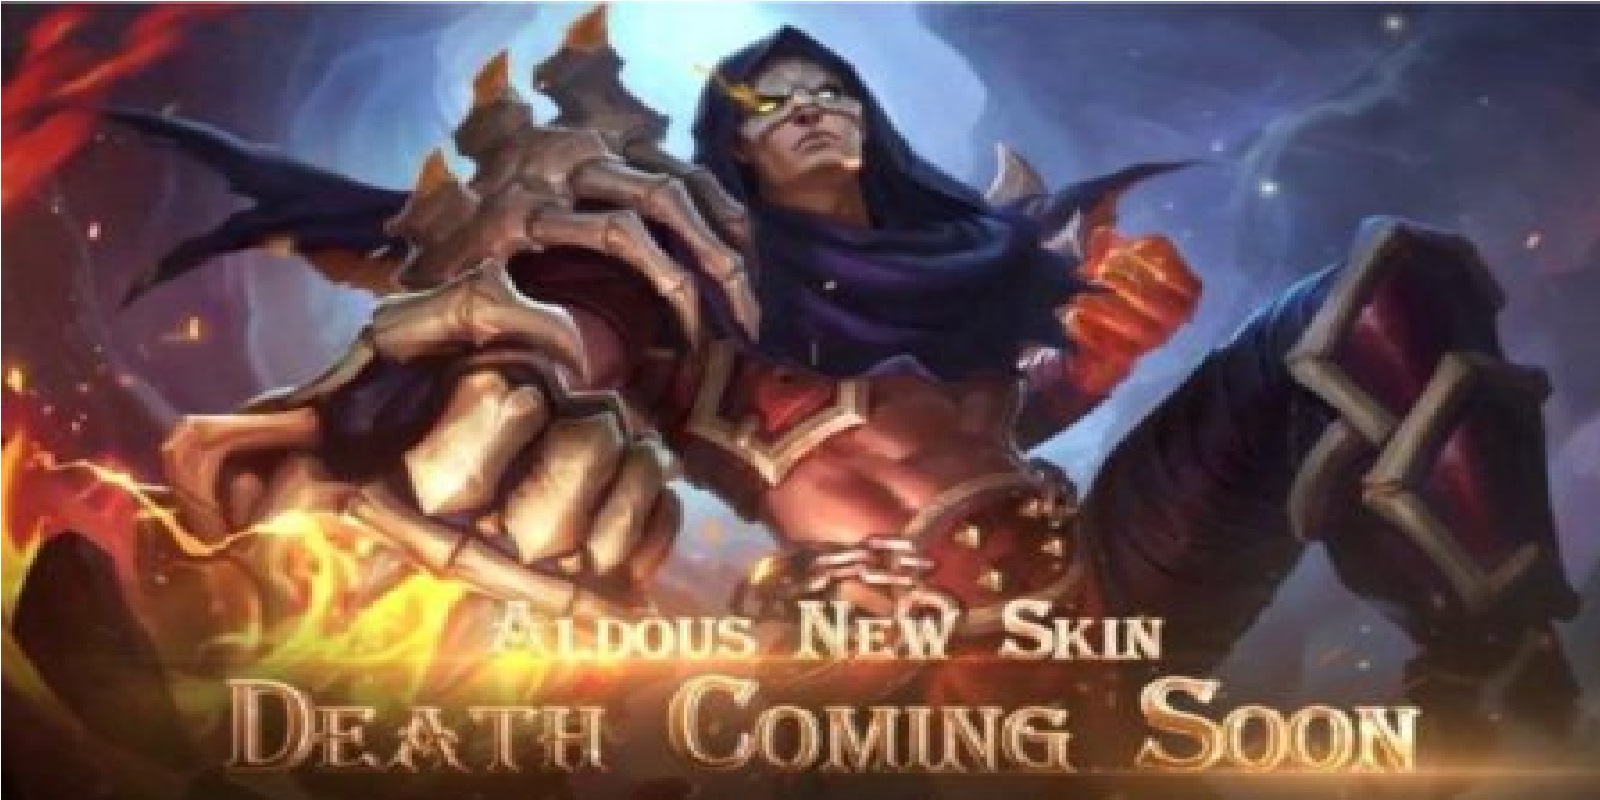 5 Heroes For Counter Aldous Mobile Legend | Esports